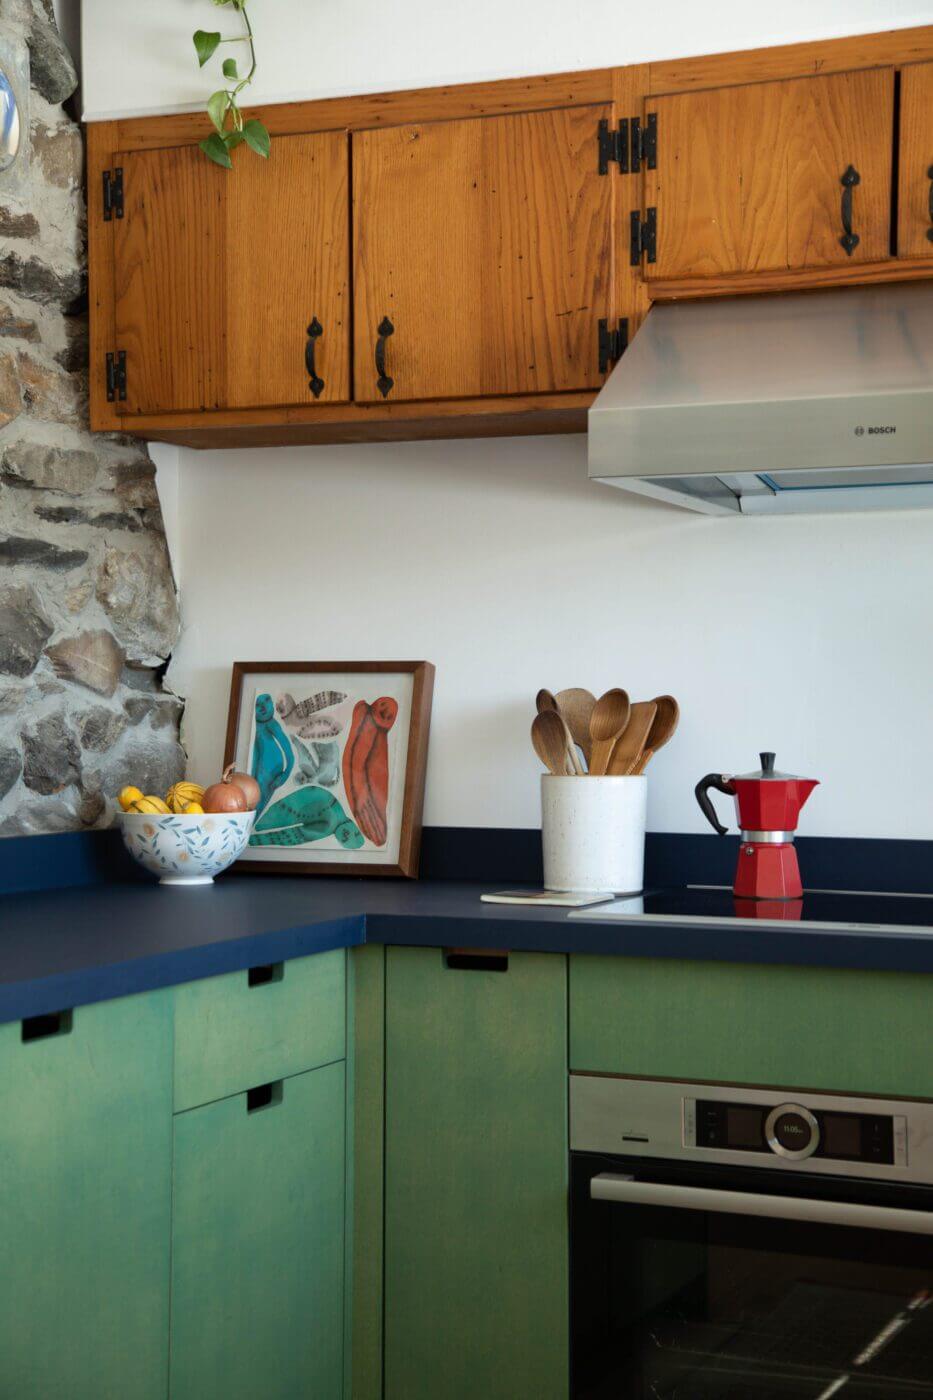 Lower cabinets are made from plywood finished with Osmo wood wax. Countertops are blue FENIX laminate.